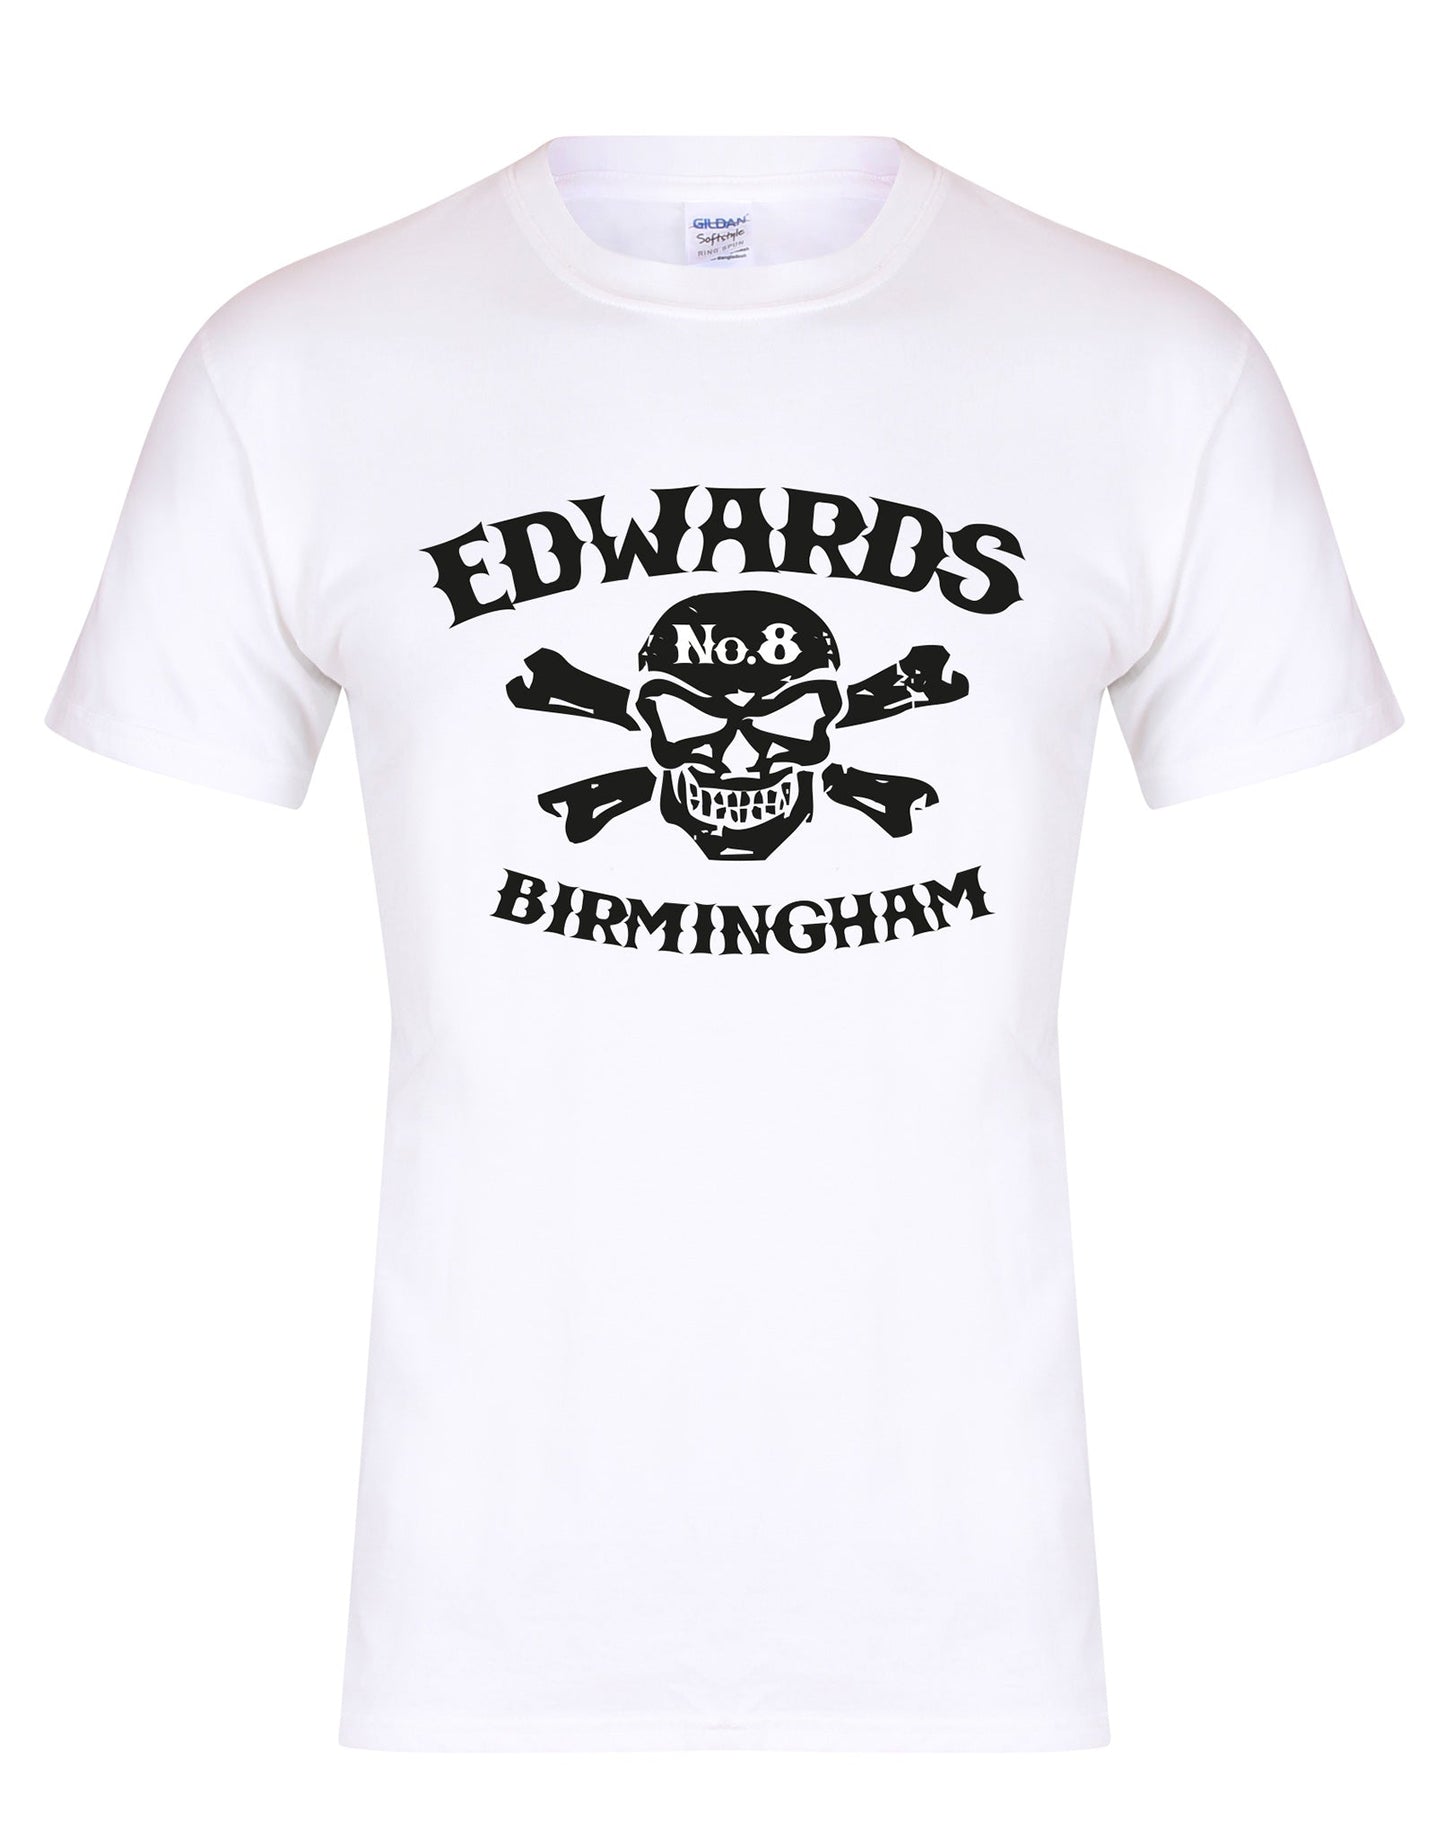 Edwards No. 8 - skull/crossbones - unisex fit T-shirt - various colours - Dirty Stop Outs